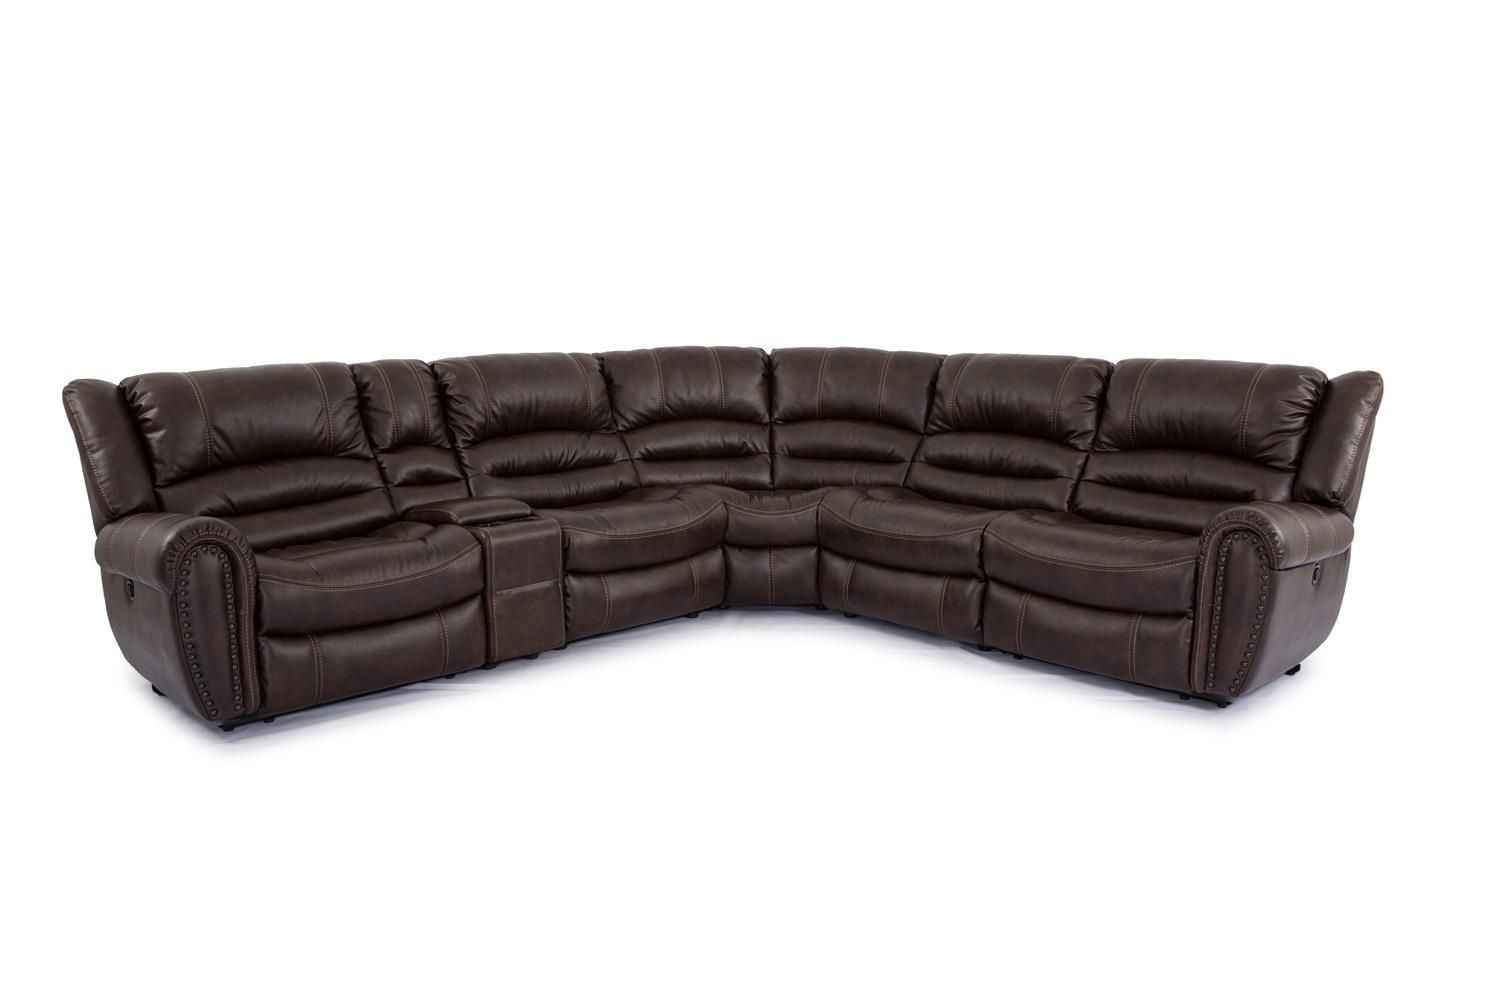 Cheers Sofa Cheers Sofa 6 Piece Sectional – Boulevard Home Throughout Cheers Sofas (View 12 of 20)